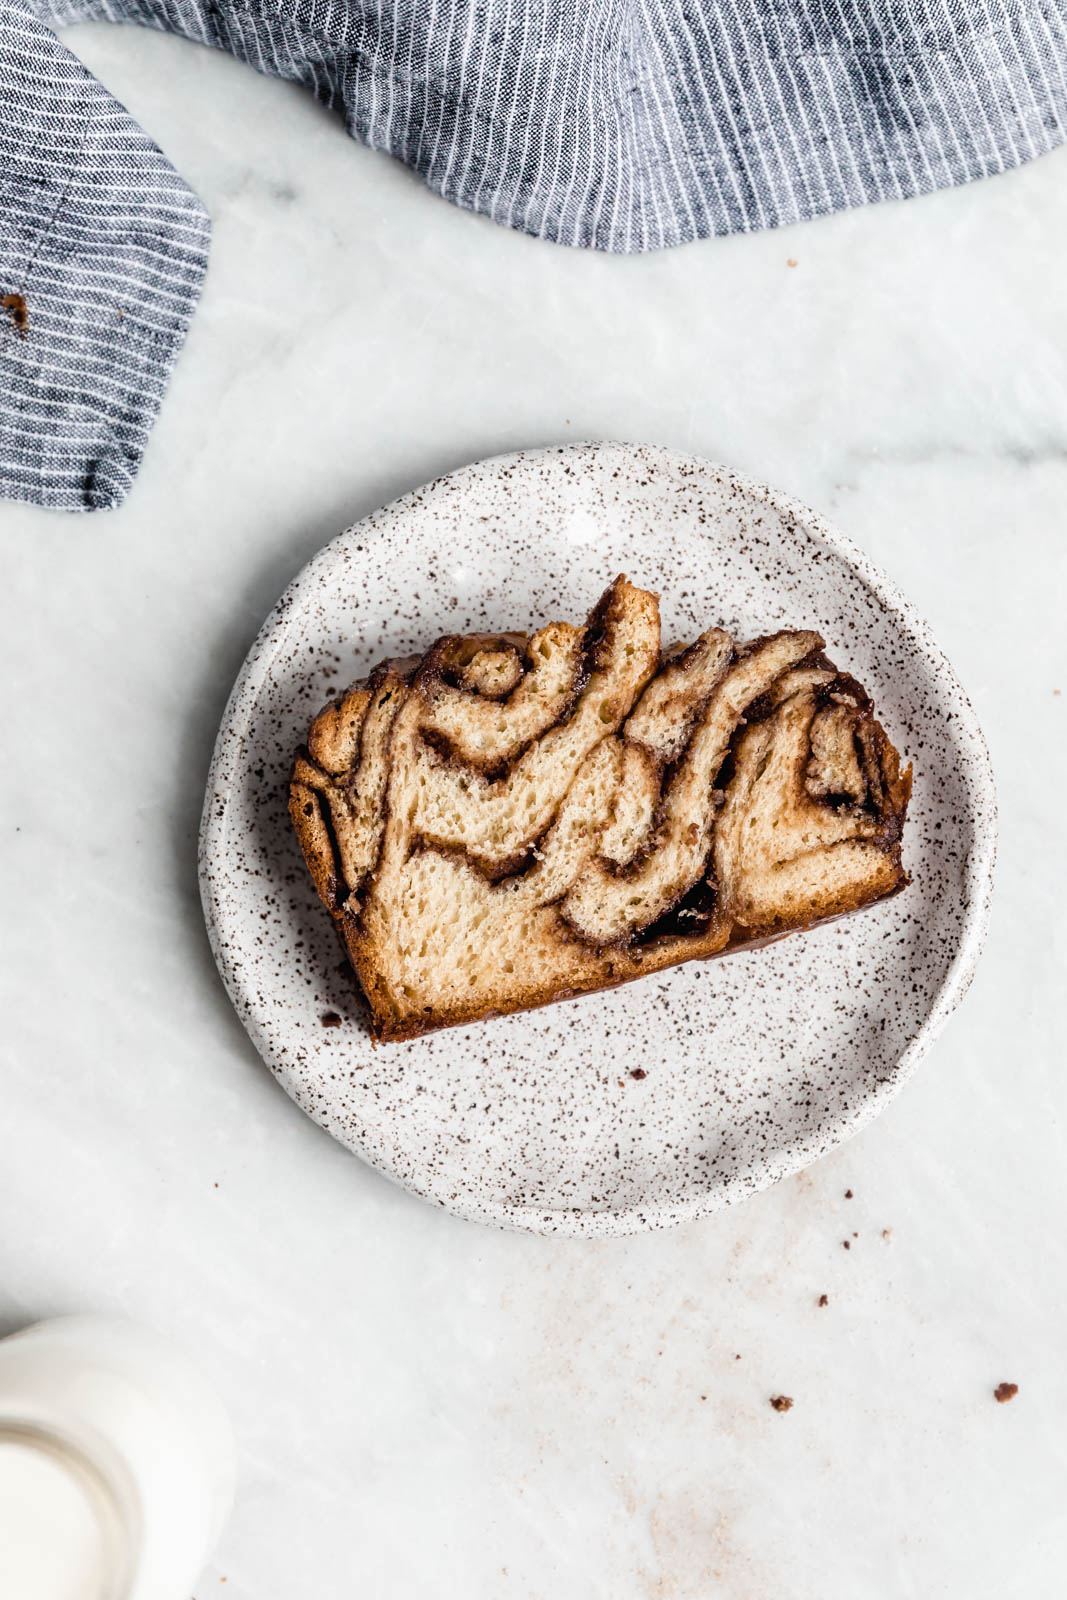 Buttery, flaky dough swirled together with cinnamon AND chocolate make this stunning Cinnamon Chocolate Babka. Step by step instructions on how to make the perfect babka!